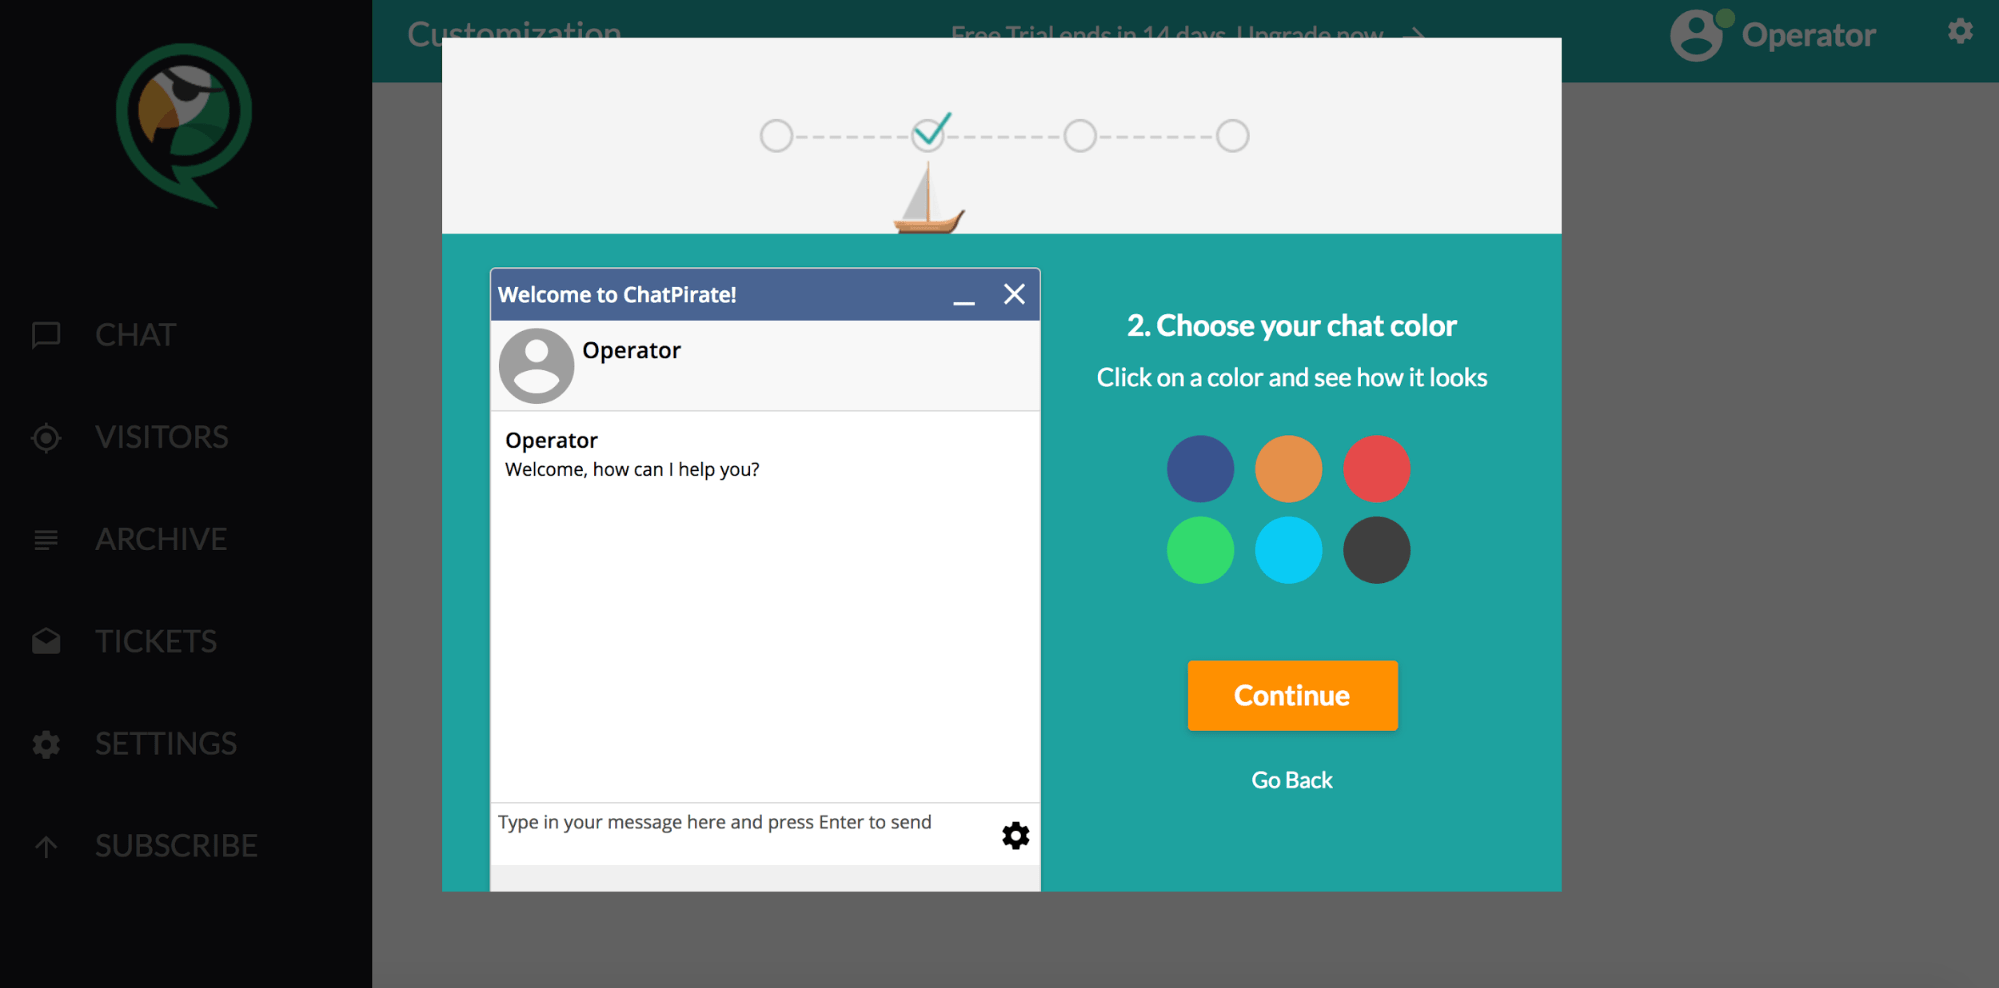 ChatPirate - 2nd step of onboarding - chat customization